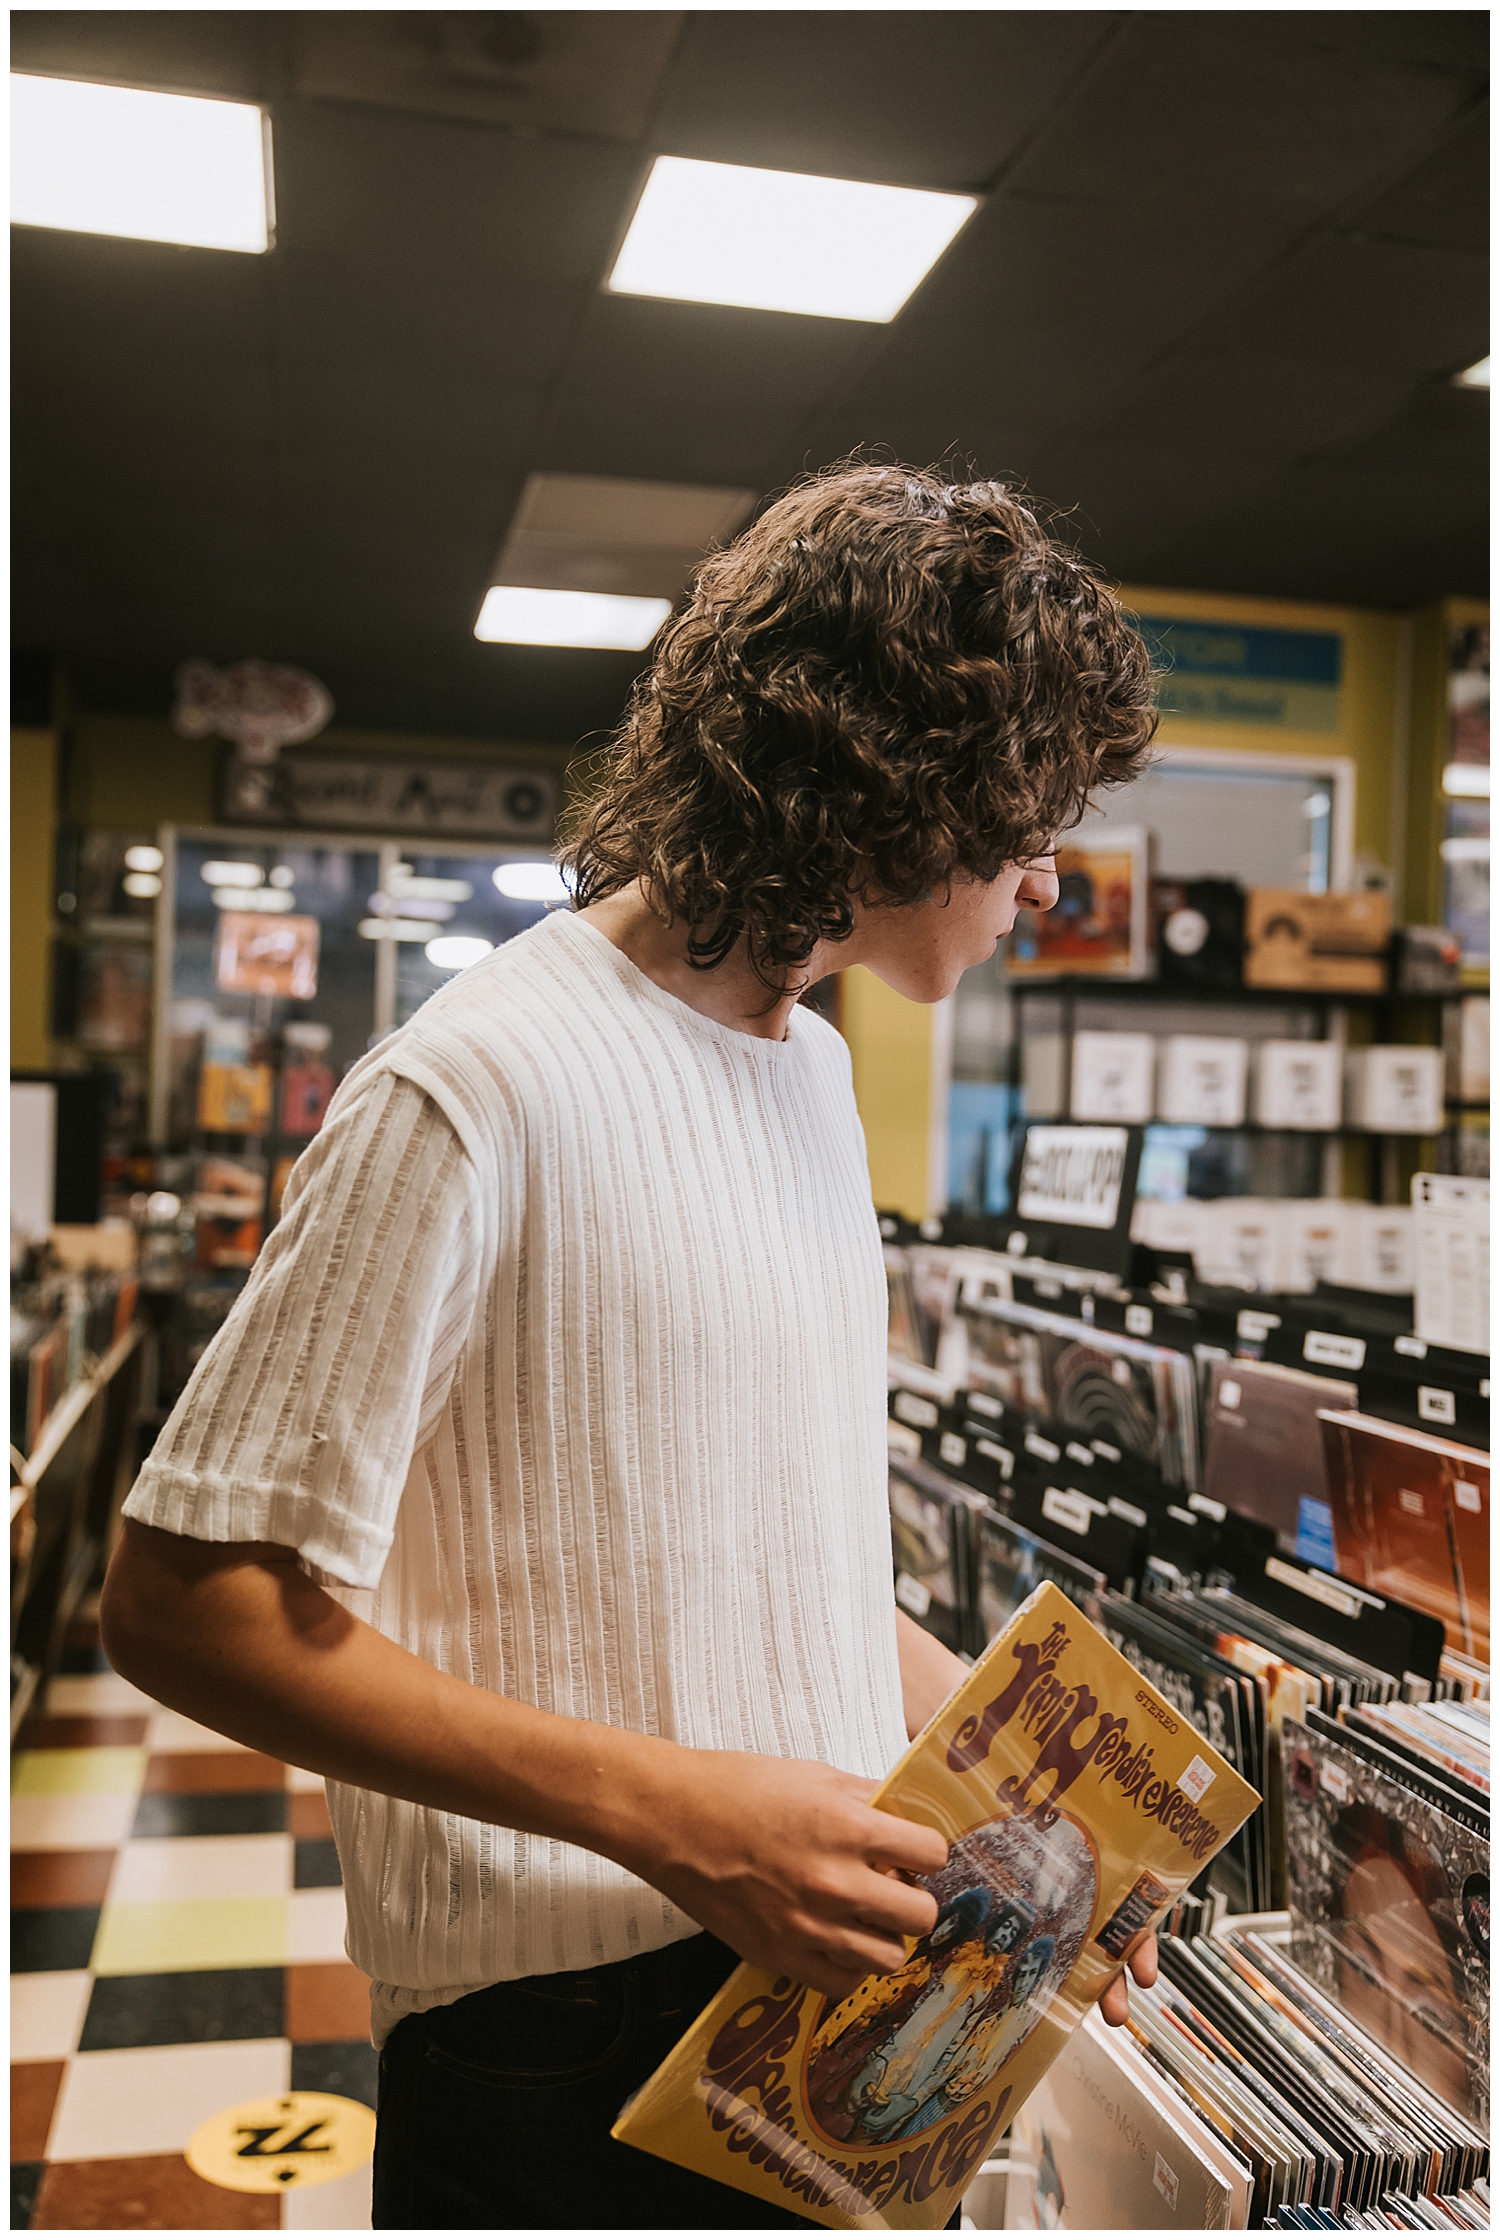 close up image of guy in white shirt looking at record albums Houston